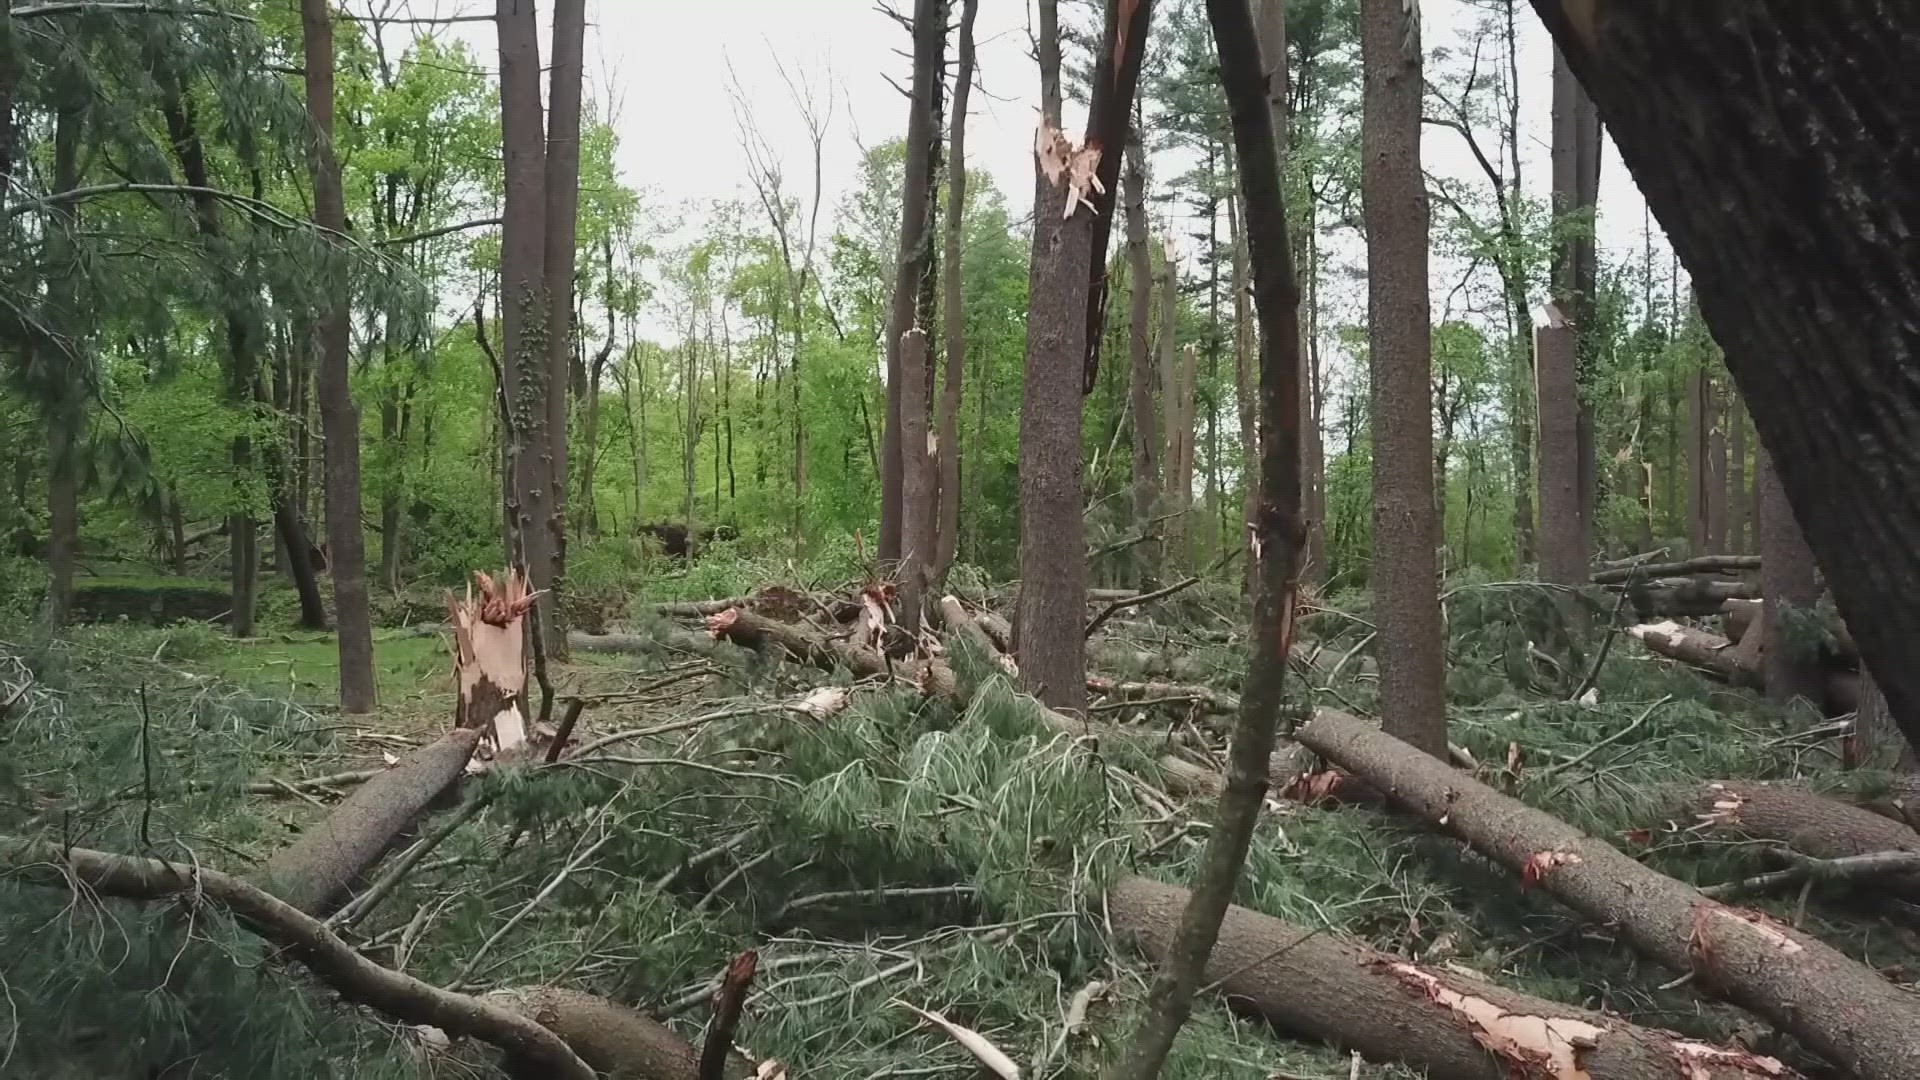 In 2018, a microburst tore down a field of trees and cluttered the trails at Sleeping Giant State Park. It took over a year to clean up the damage and rebuild.